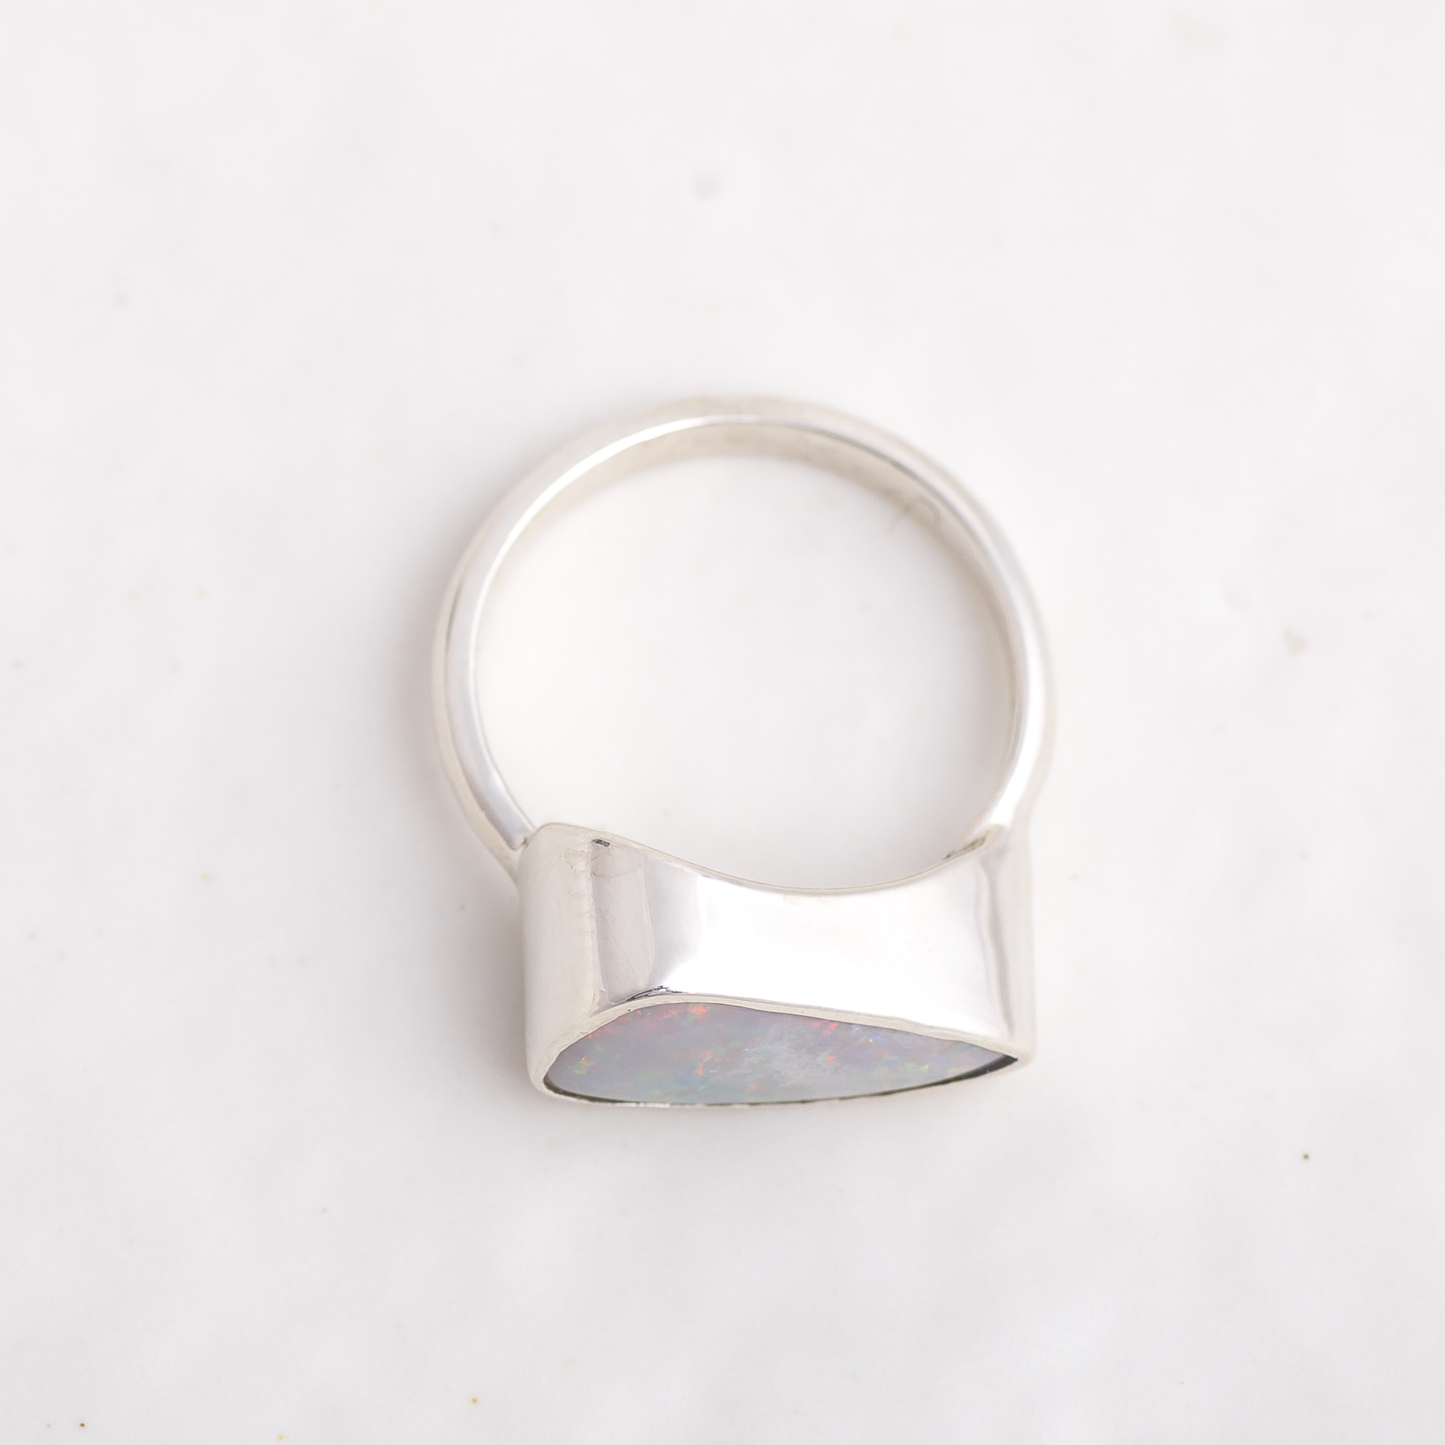 Opal East West Ring #10 ◇ Australian Opal ◇ Made in your size.